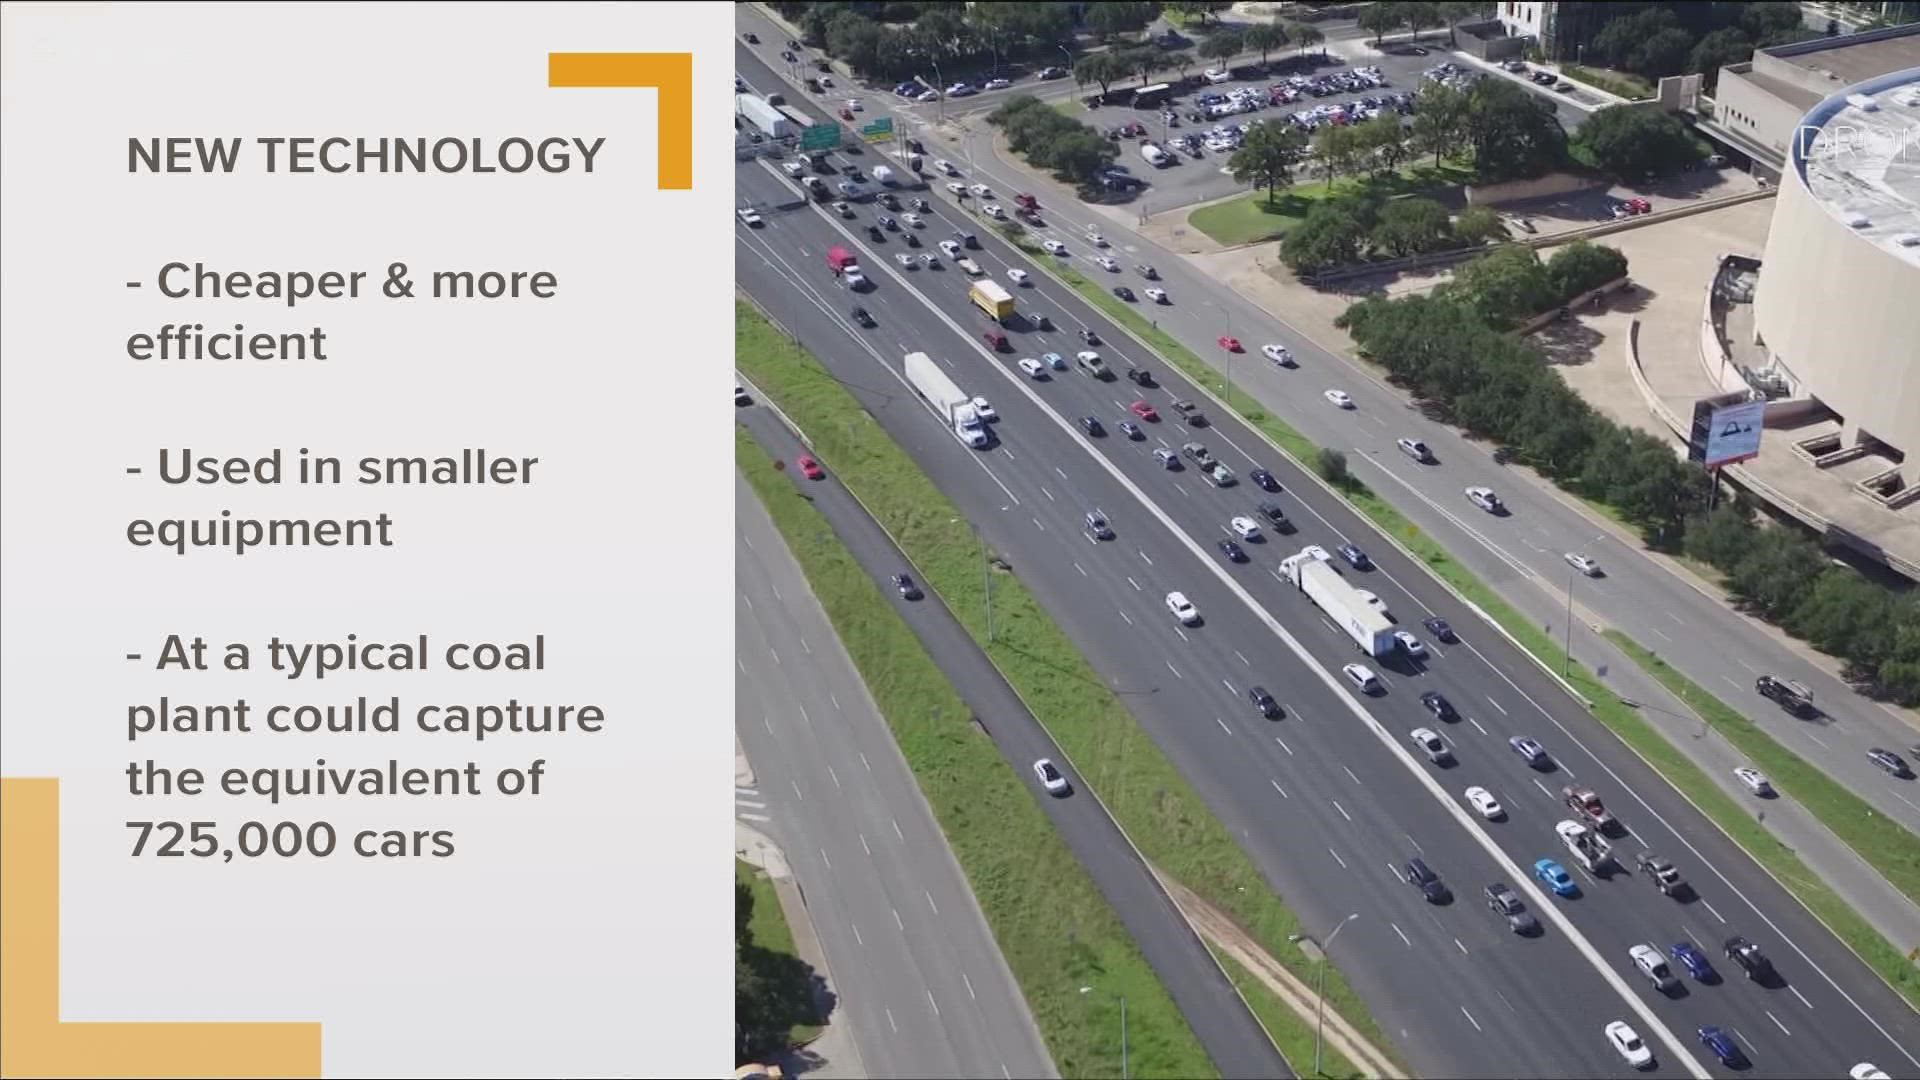 If used at a typical coal powered plant, the carbon dioxide captured would be equivalent to the amount made by 725,000 cars.